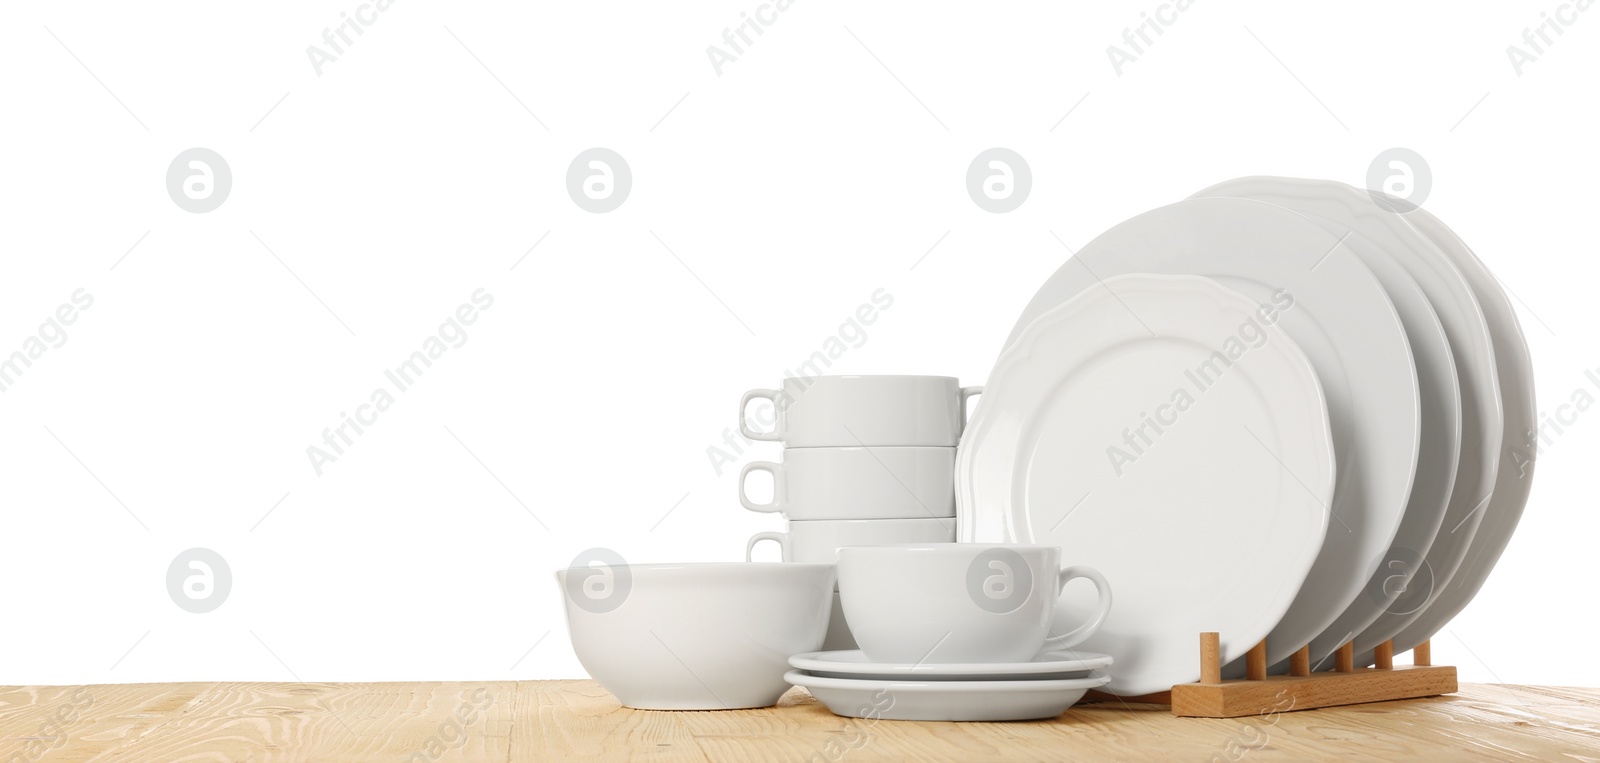 Photo of Set of different clean dishware on wooden table against white background